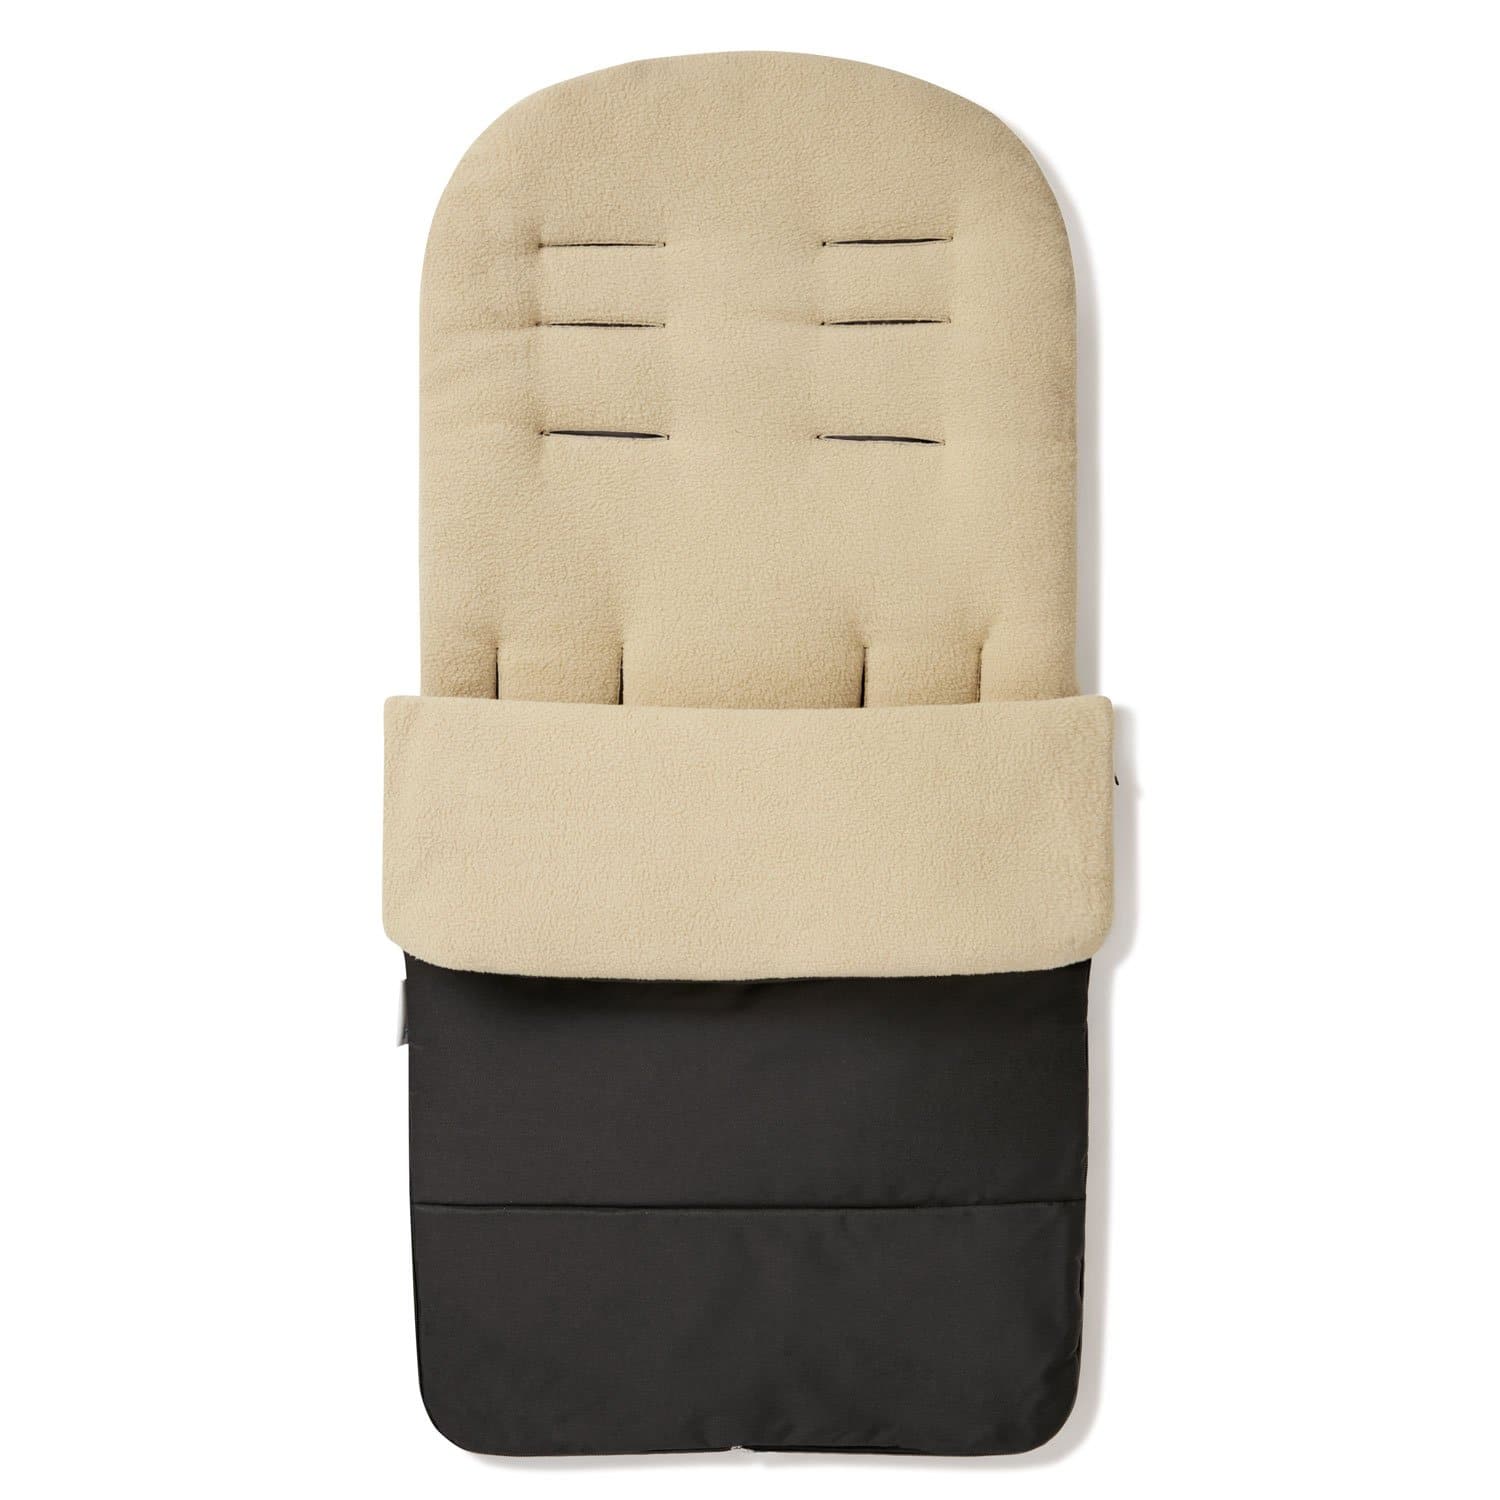 Premium Footmuff / Cosy Toes Compatible with Brio - Desert Sand / Fits All Models | For Your Little One